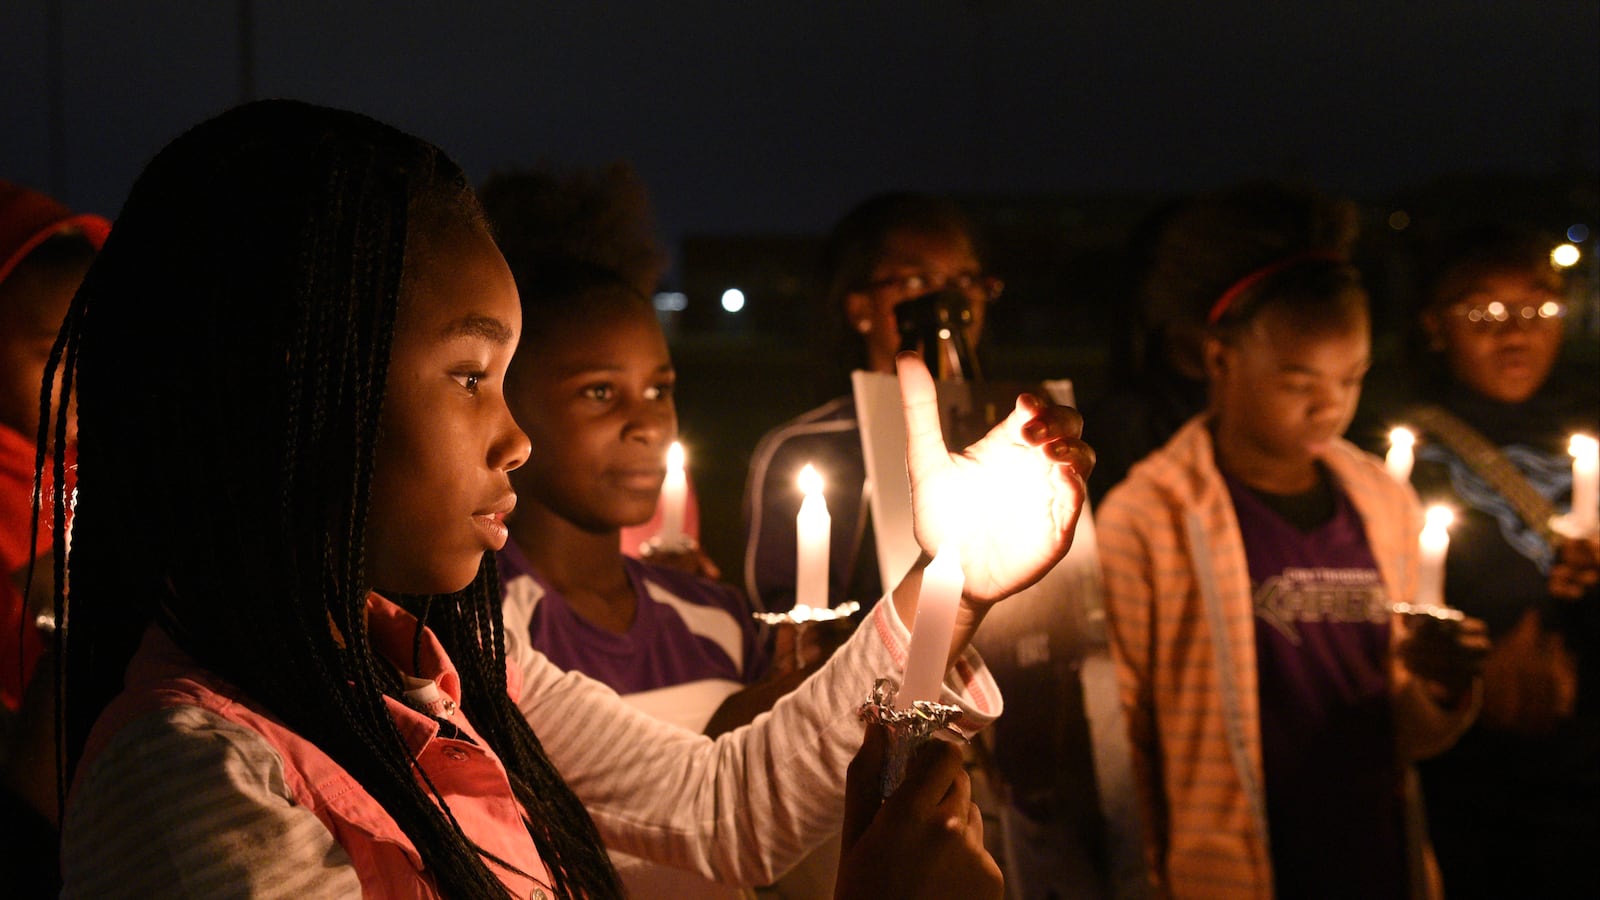 Ma'Liyah Montgomery participates in a candlelight vigil on Nov. 23, 2016, to remember Zoie Nash, one of six elementary school students killed that week in a school bus crash in Chattanooga, Tenn.